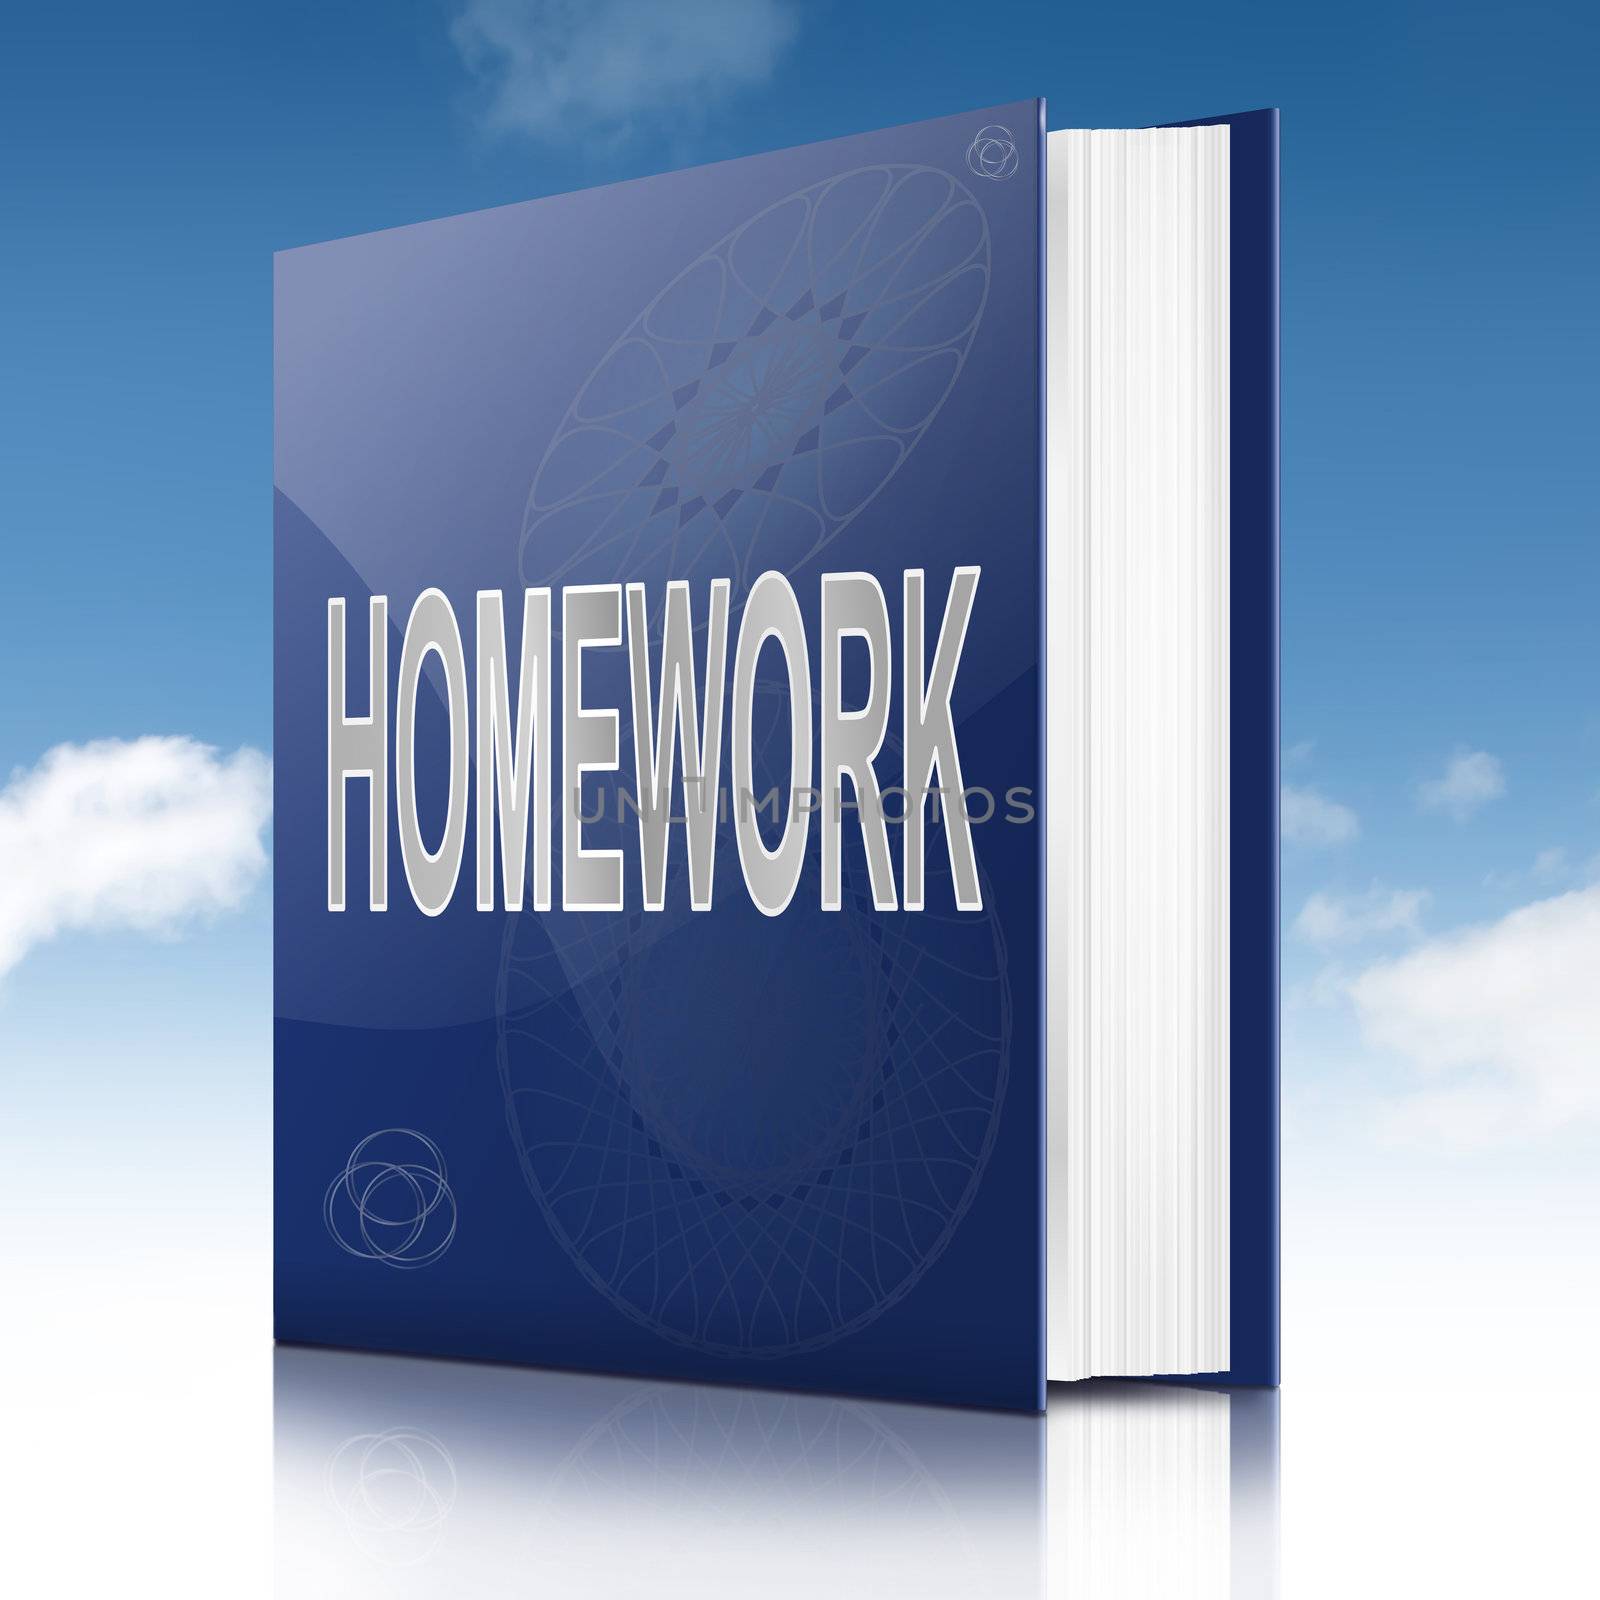 Illustration depicting a book with a homework concept title. Sky background.